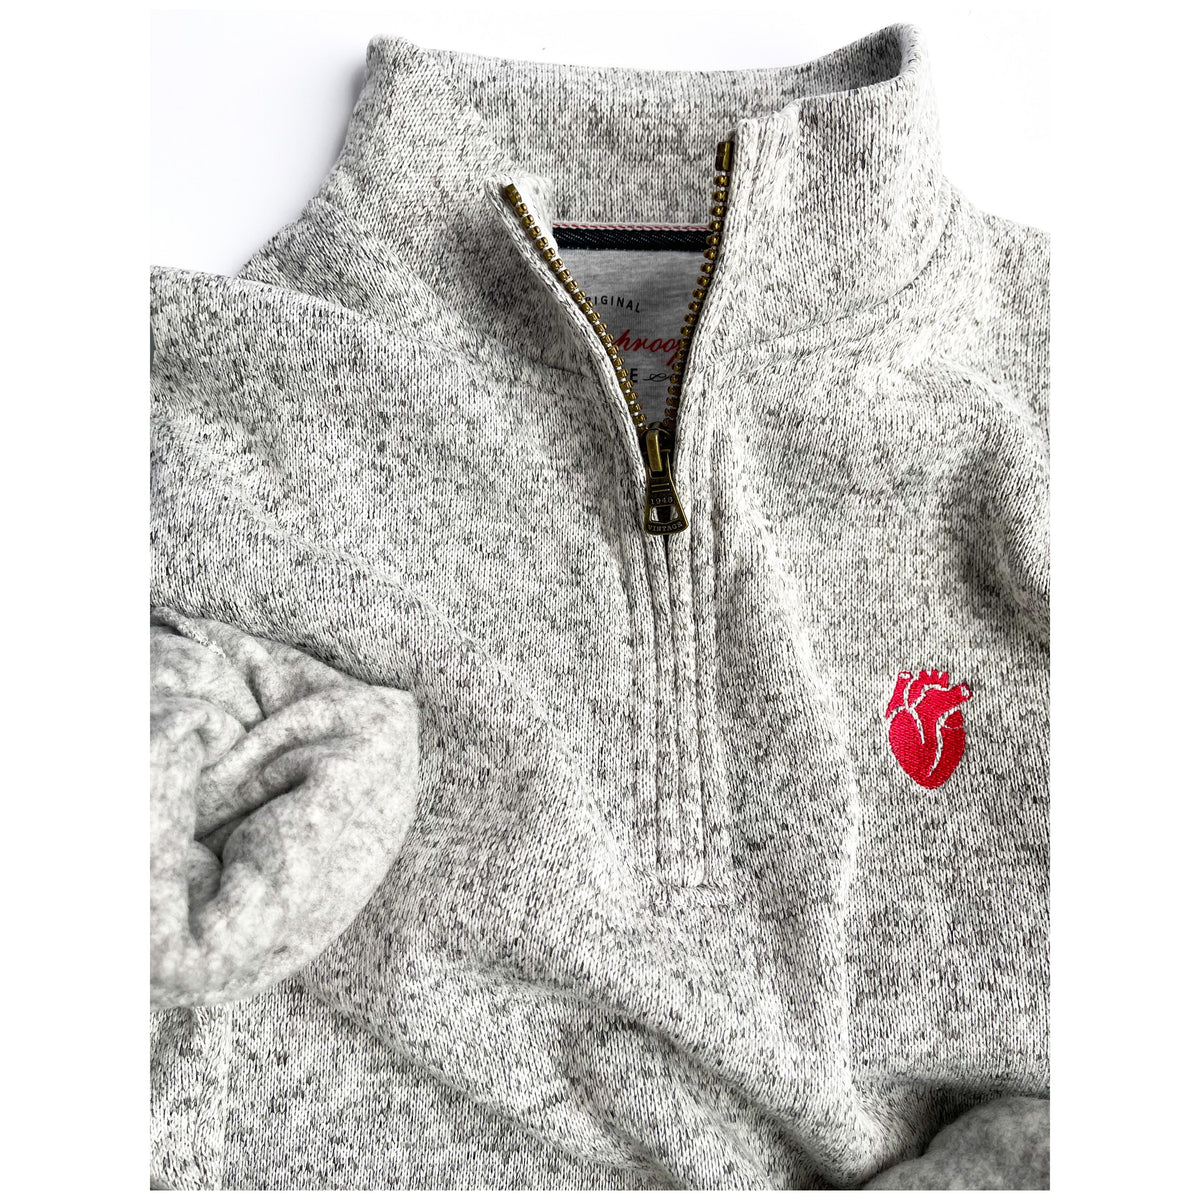 Embroidered Heart Quarter-Zip Pullover